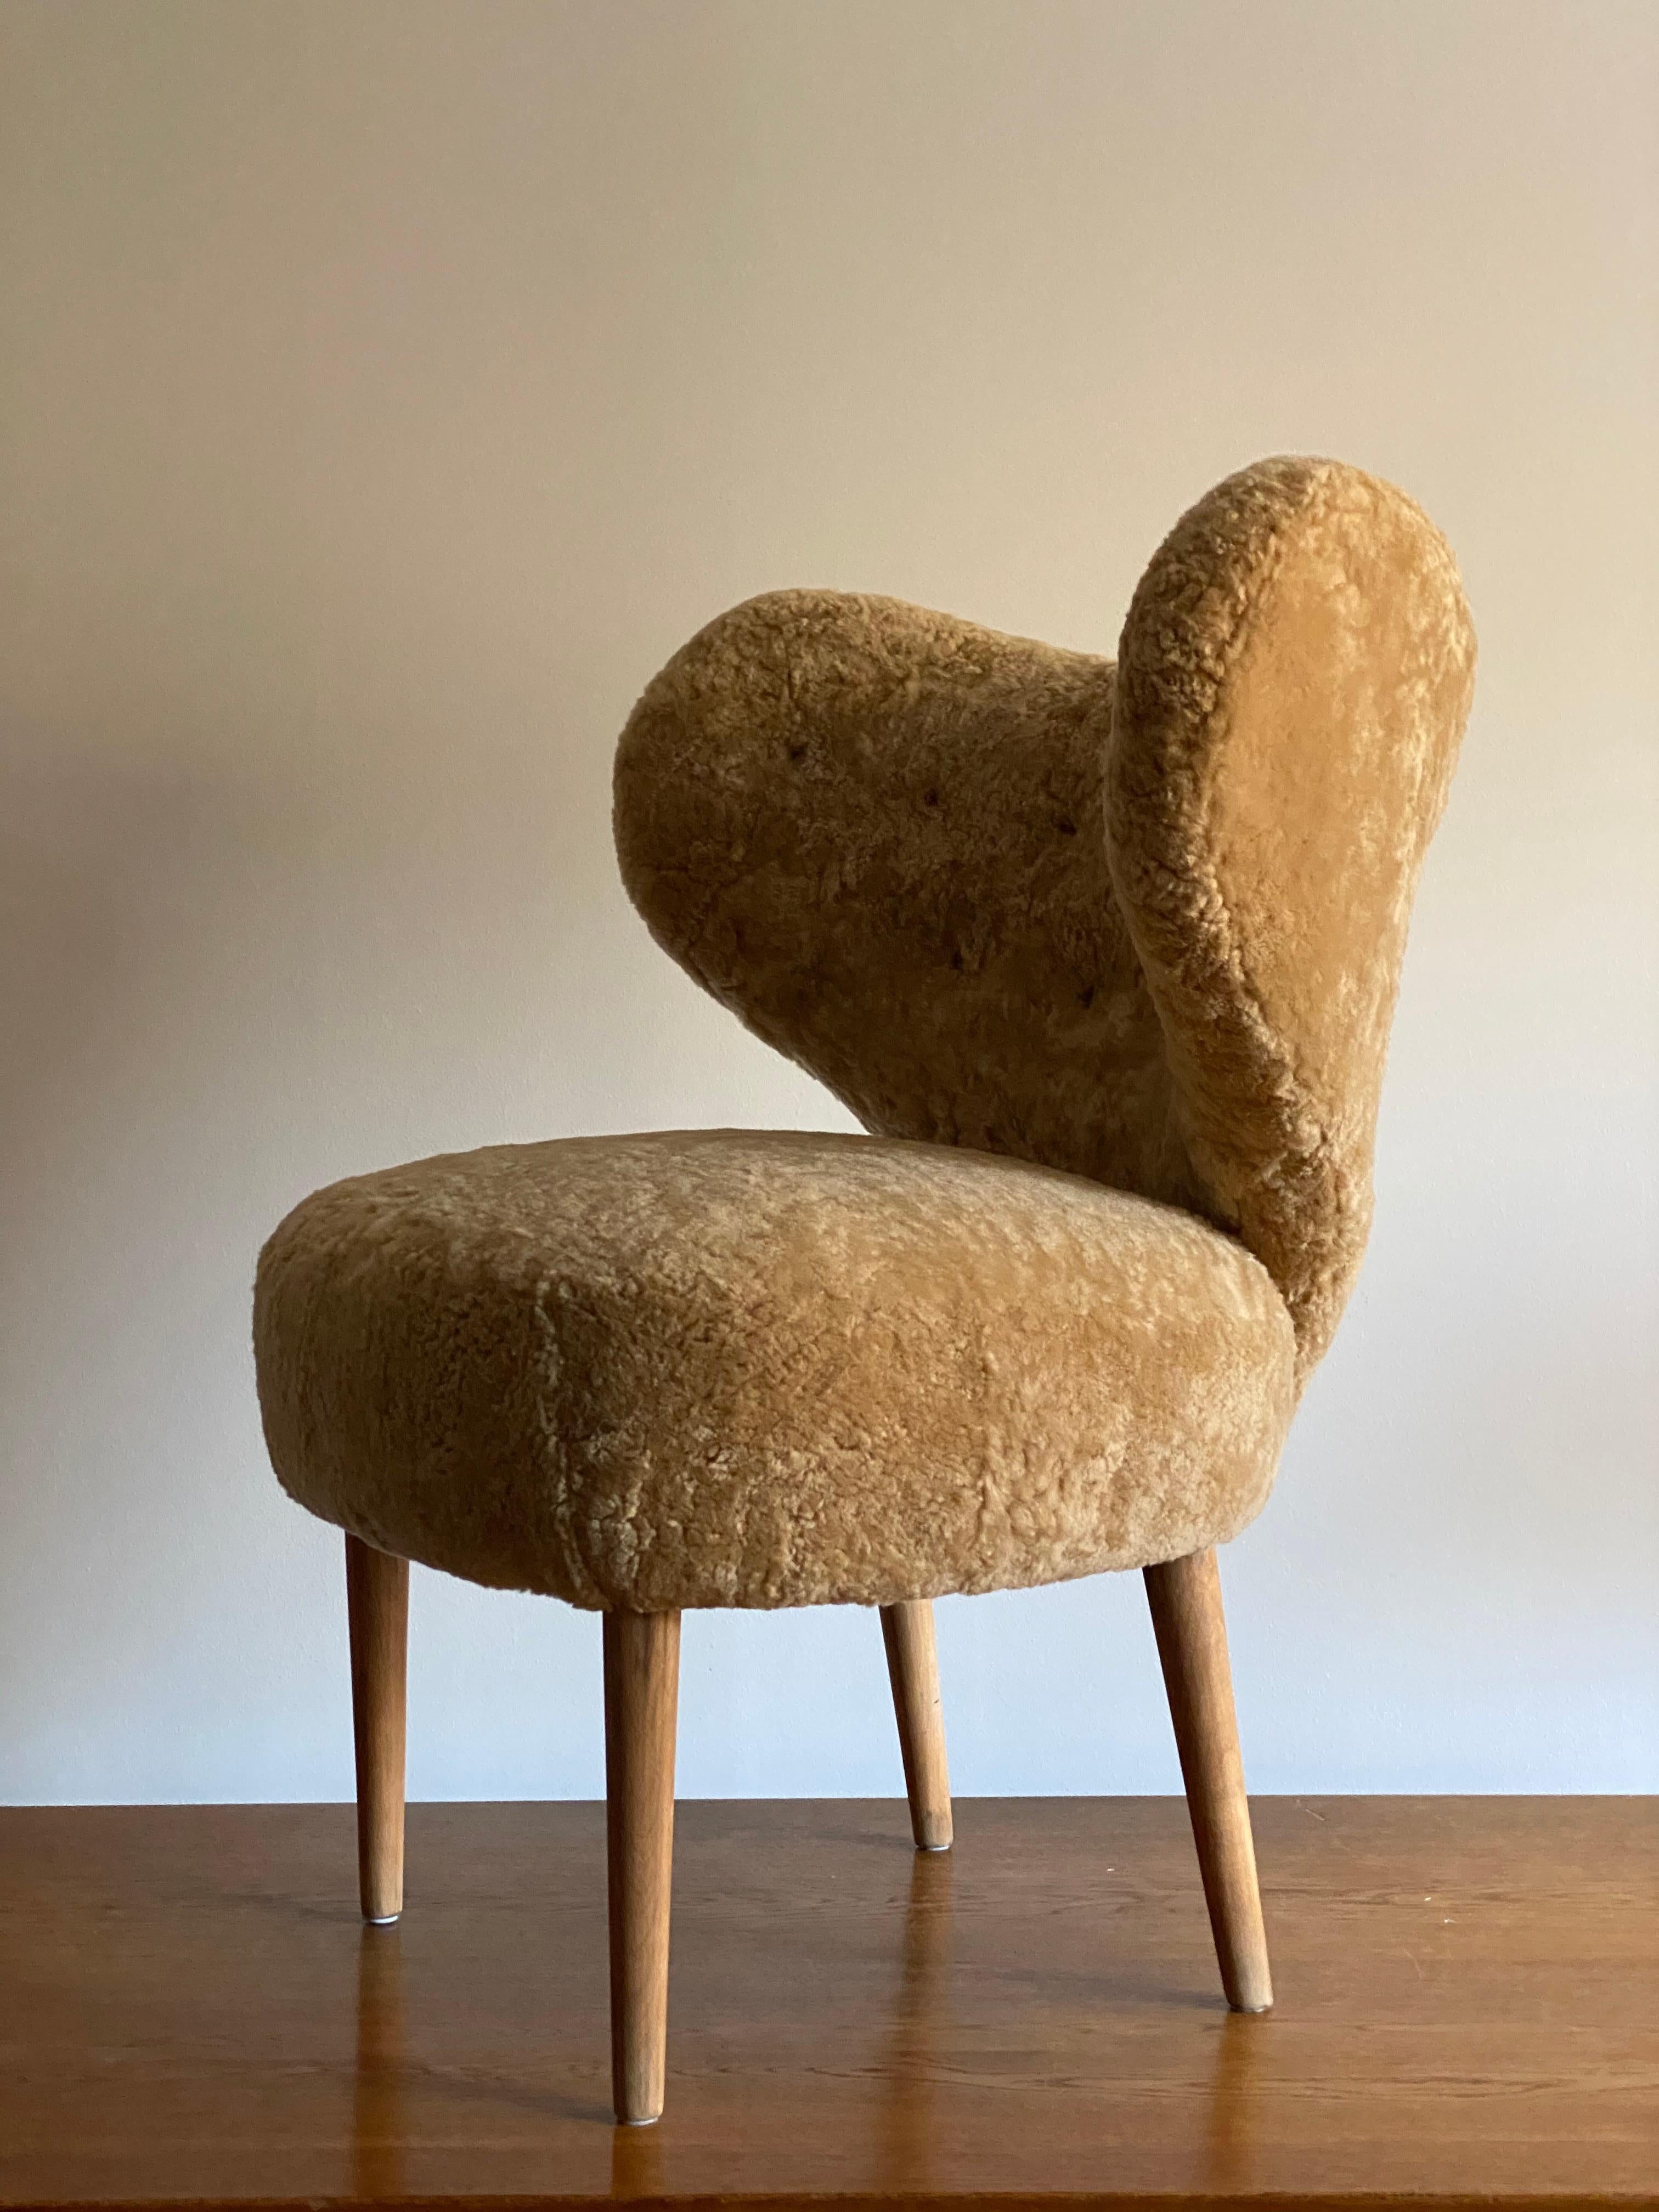 A rare organic and sculptural lounge chair / high back chair. Design attributed to Magnus Stephensen. The chairs' organic form is further enhanced by sheepskin upholstery. Produced in the late 1940s, or possibly the early 1950s.

Other designers